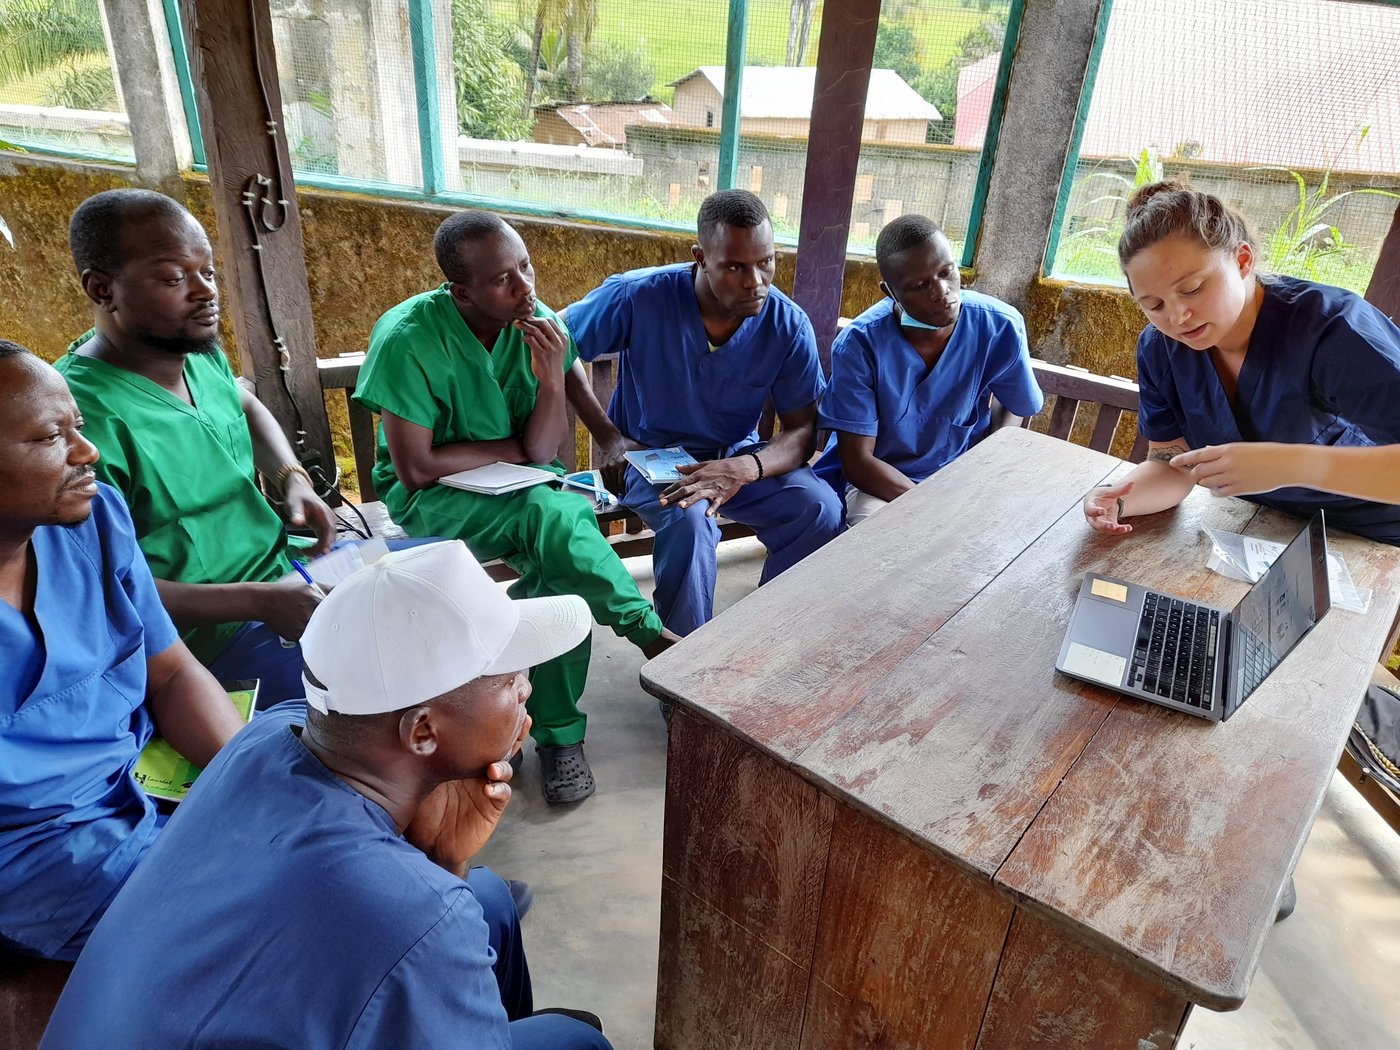 A class room scene in Guinea. A trainer is explaining something shown on a laptop, while six Guinean laboratory staff are listening.